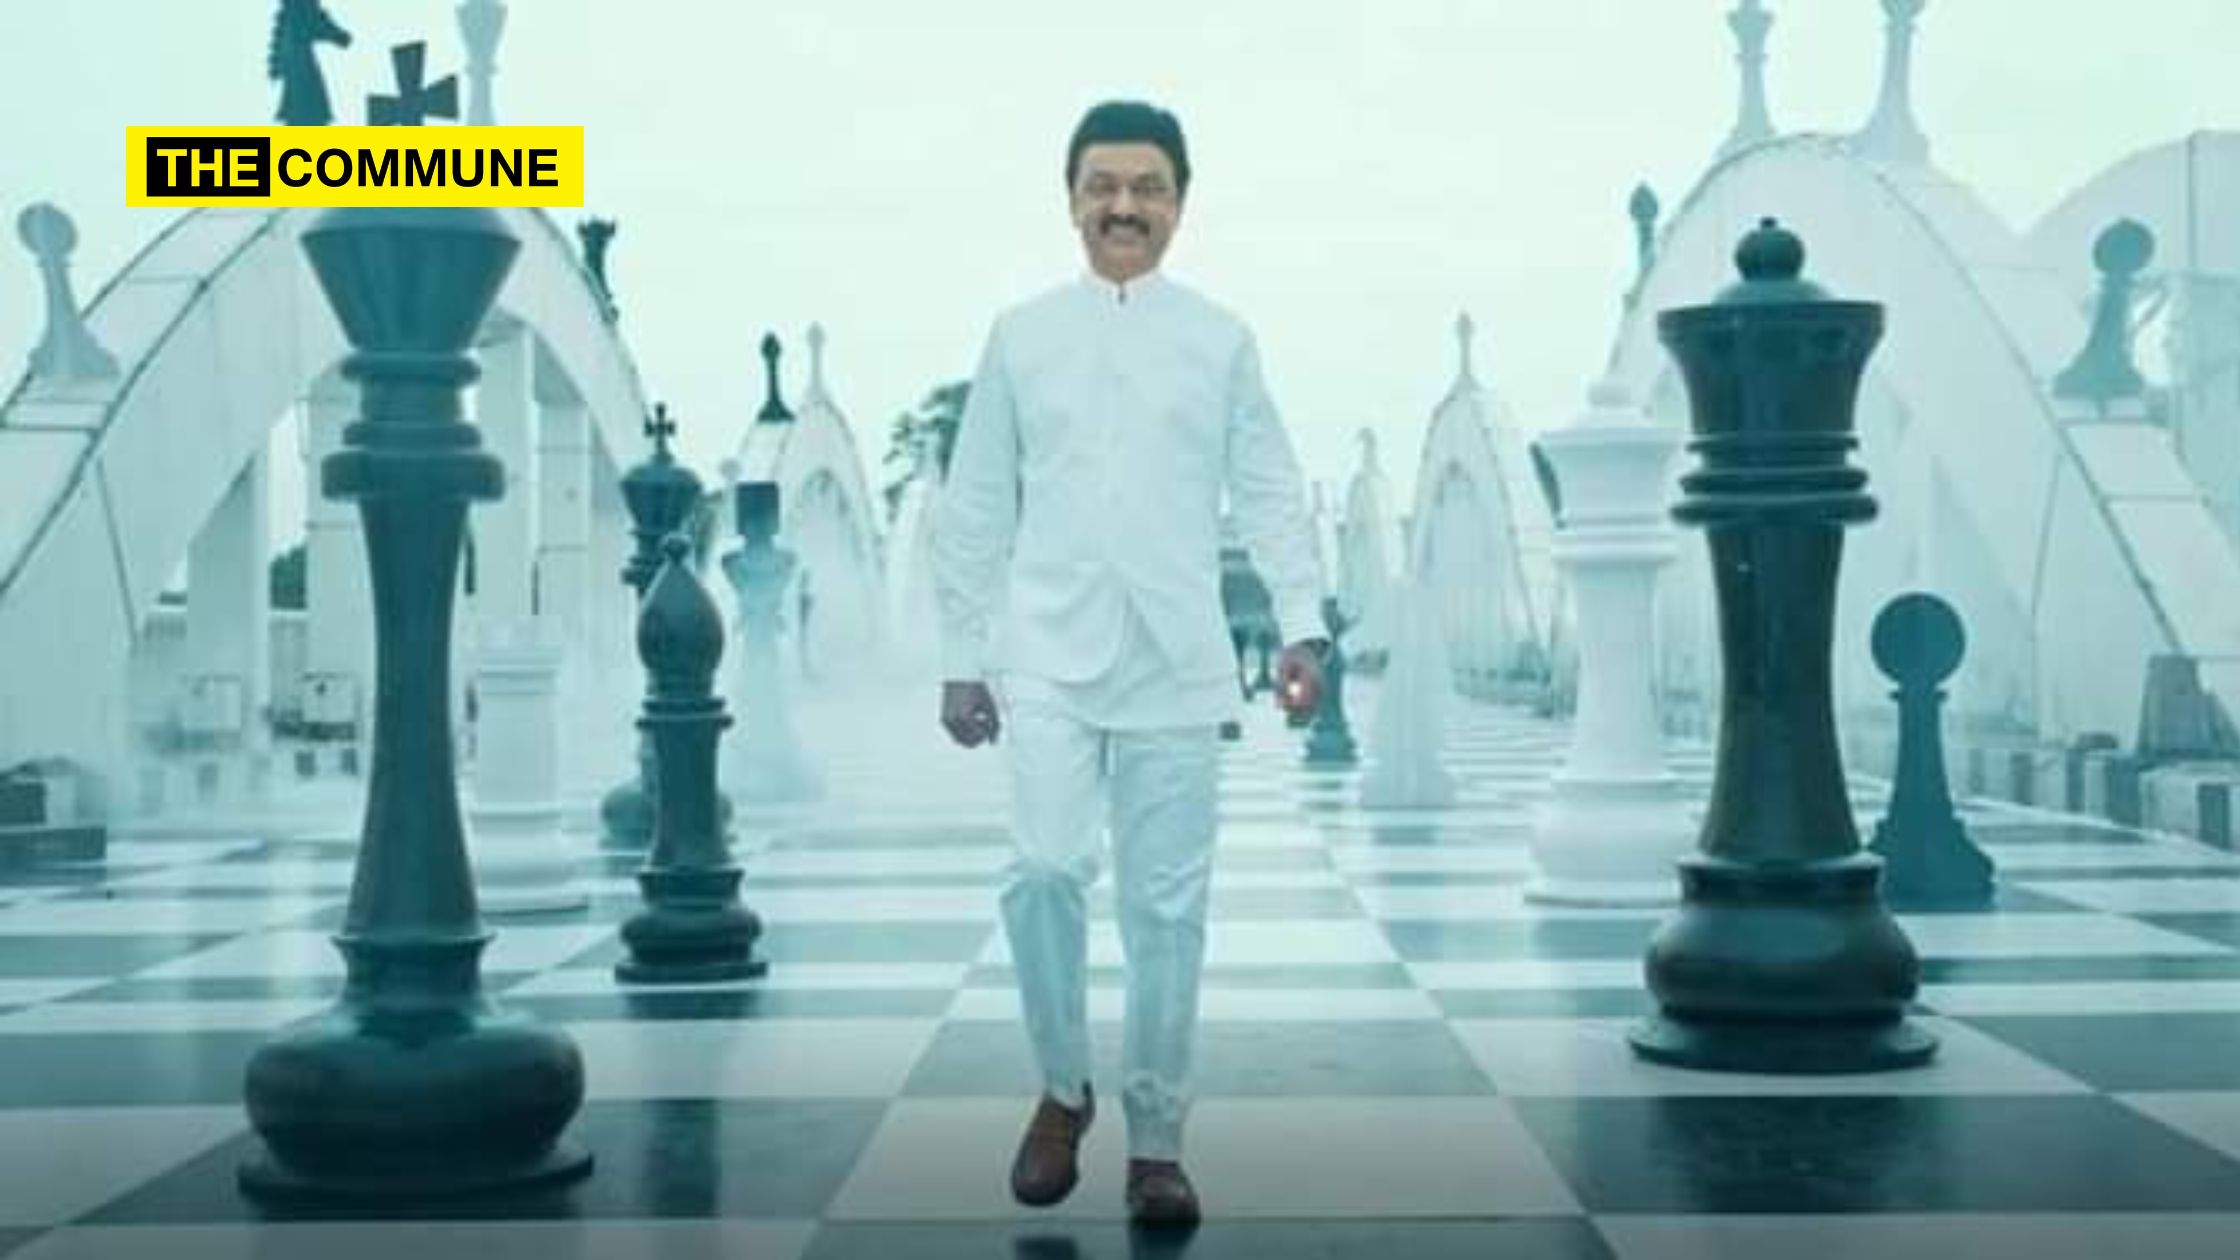 Chess Olympiad 2022: A Knight Wearing Dhoti, Shirt With Folded Hands Is the  Mascot For the Mega Chess Event